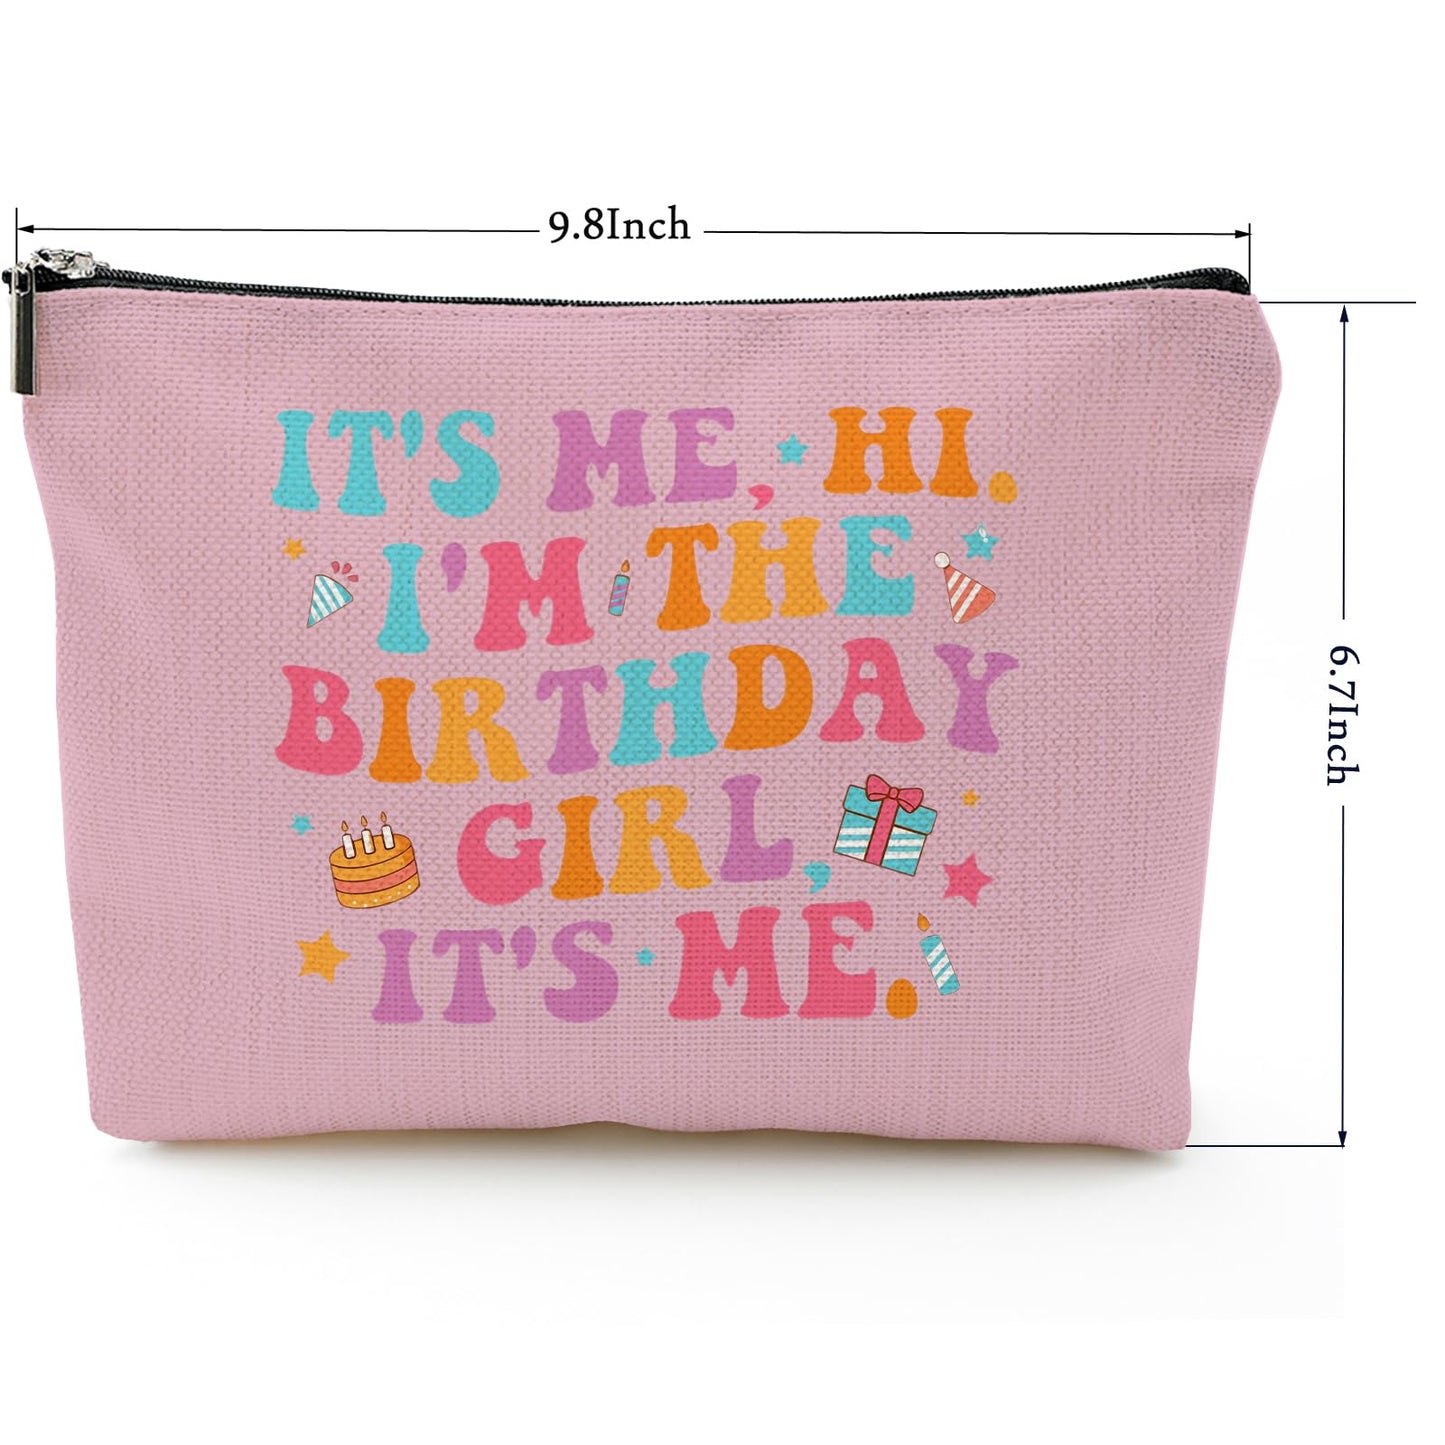 Its Me Hi I'm the Birthday Girl Makeup Bag for Singer Fans,Music Lovers Merch Birthday gifts for TS Fans,Pink Cosmtic Bag for Fans